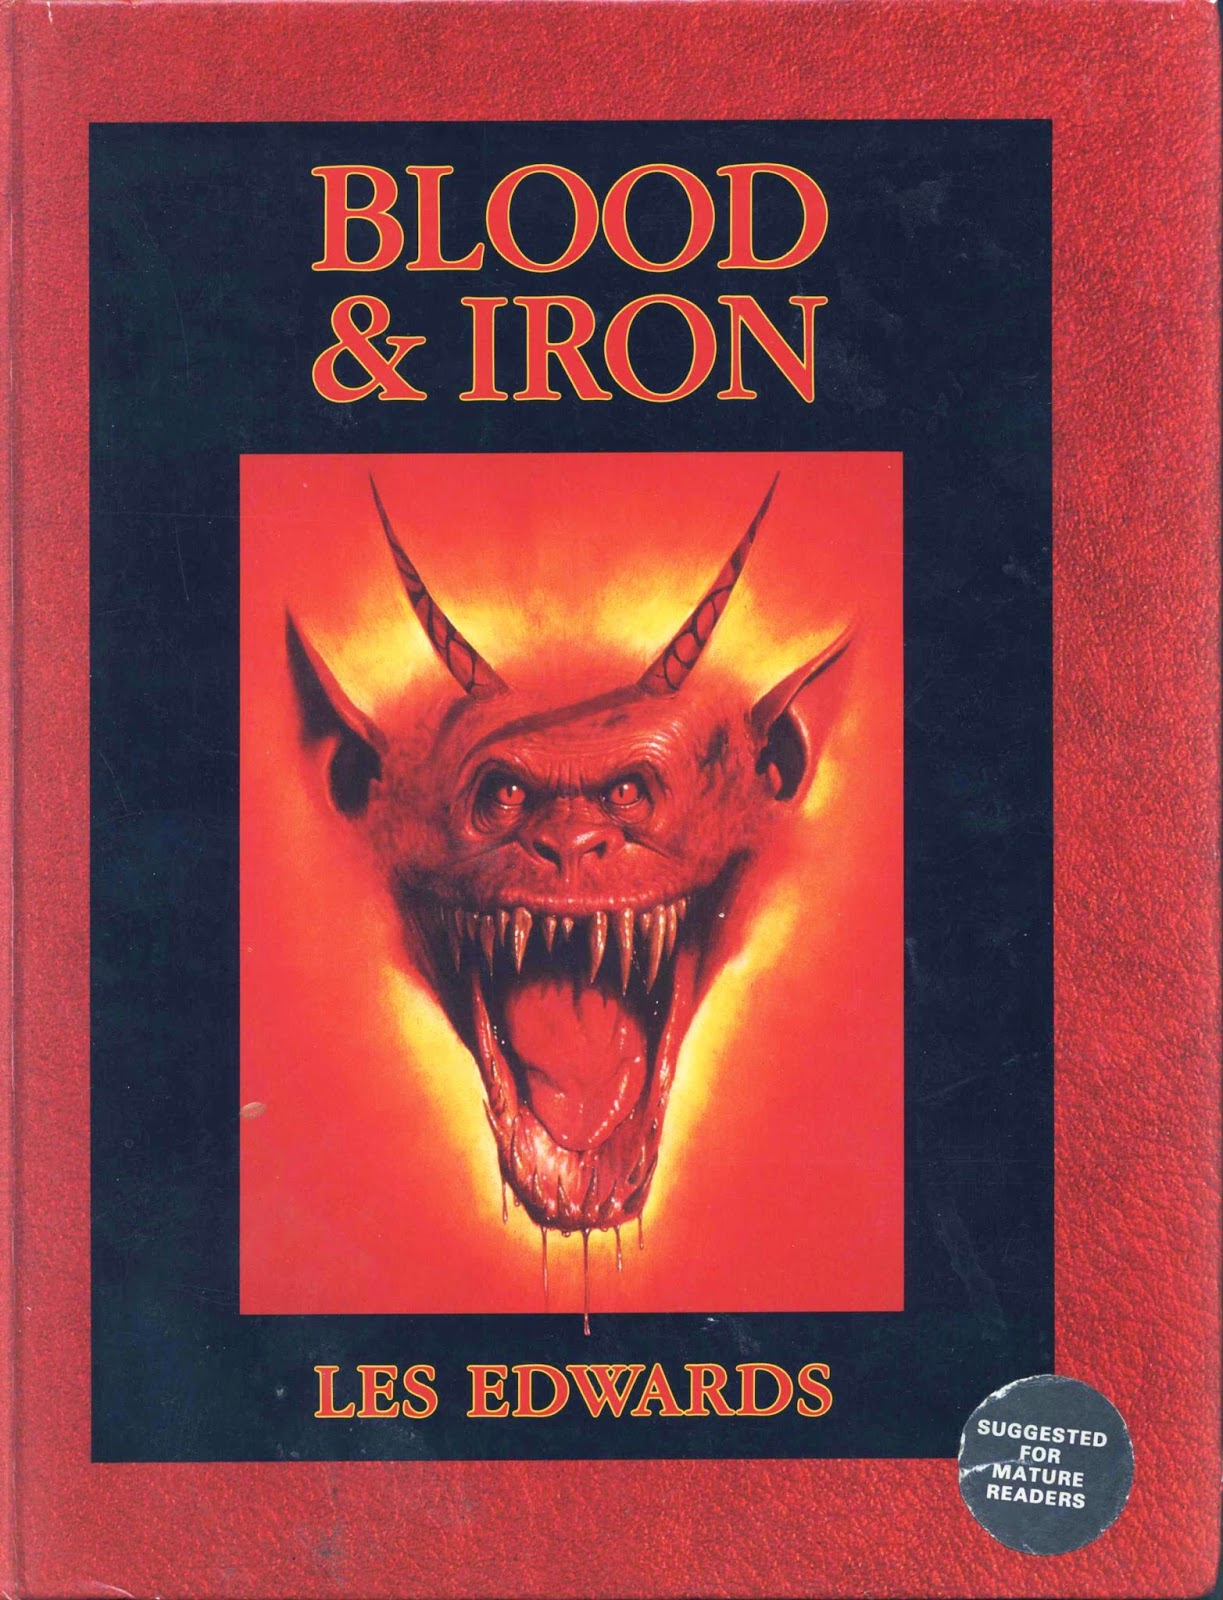 Blood and iron book les edwards book